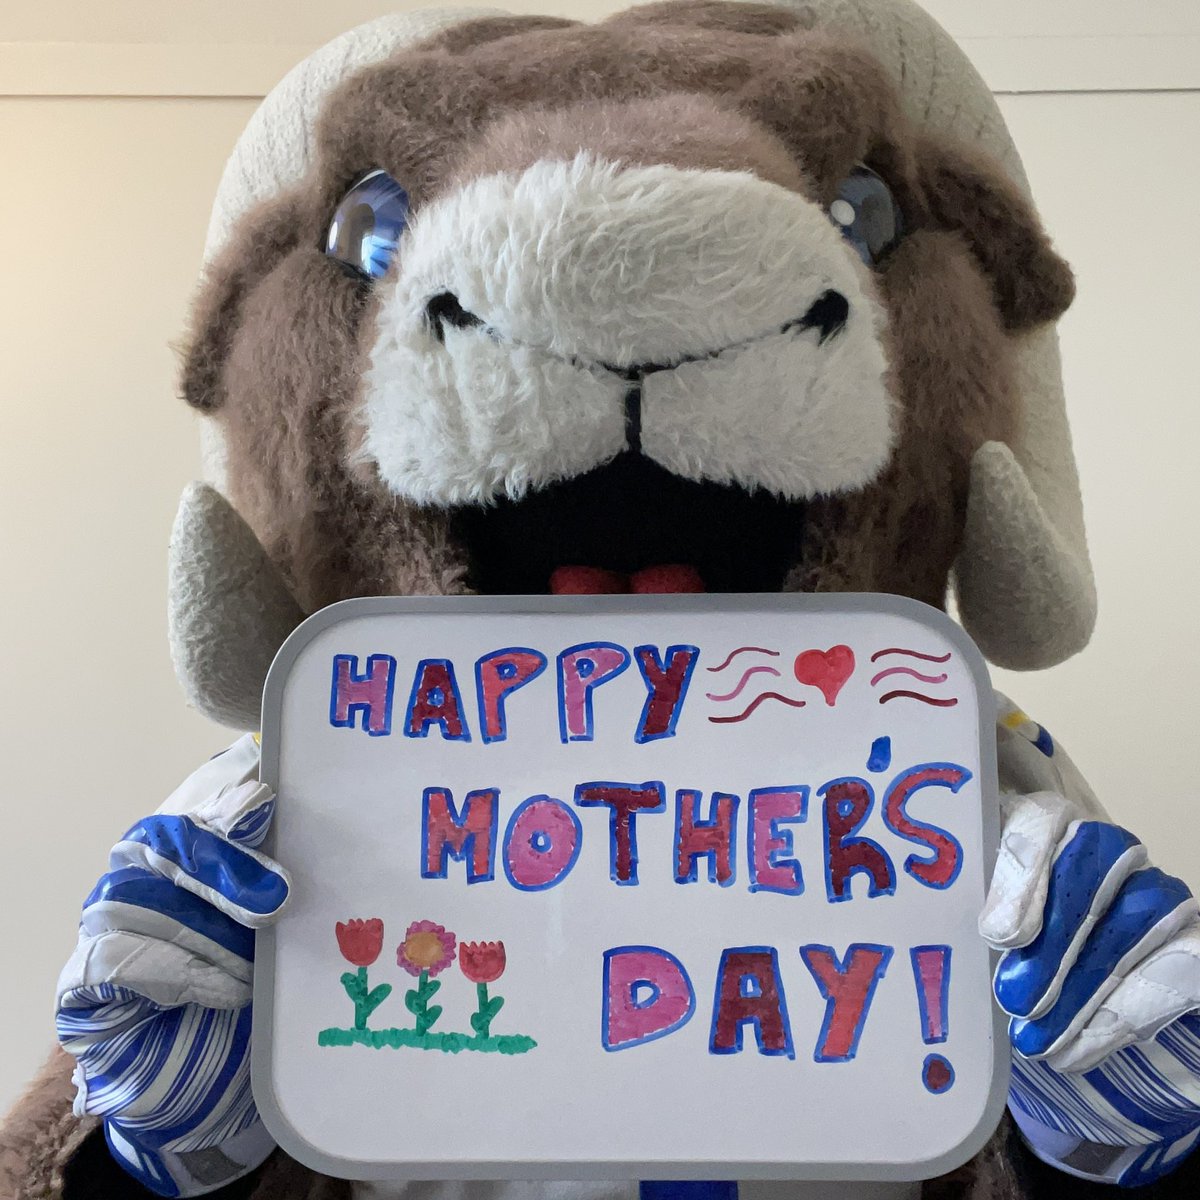 Wishing everyone a very Happy #MothersDay! 💐 #RamsHouse